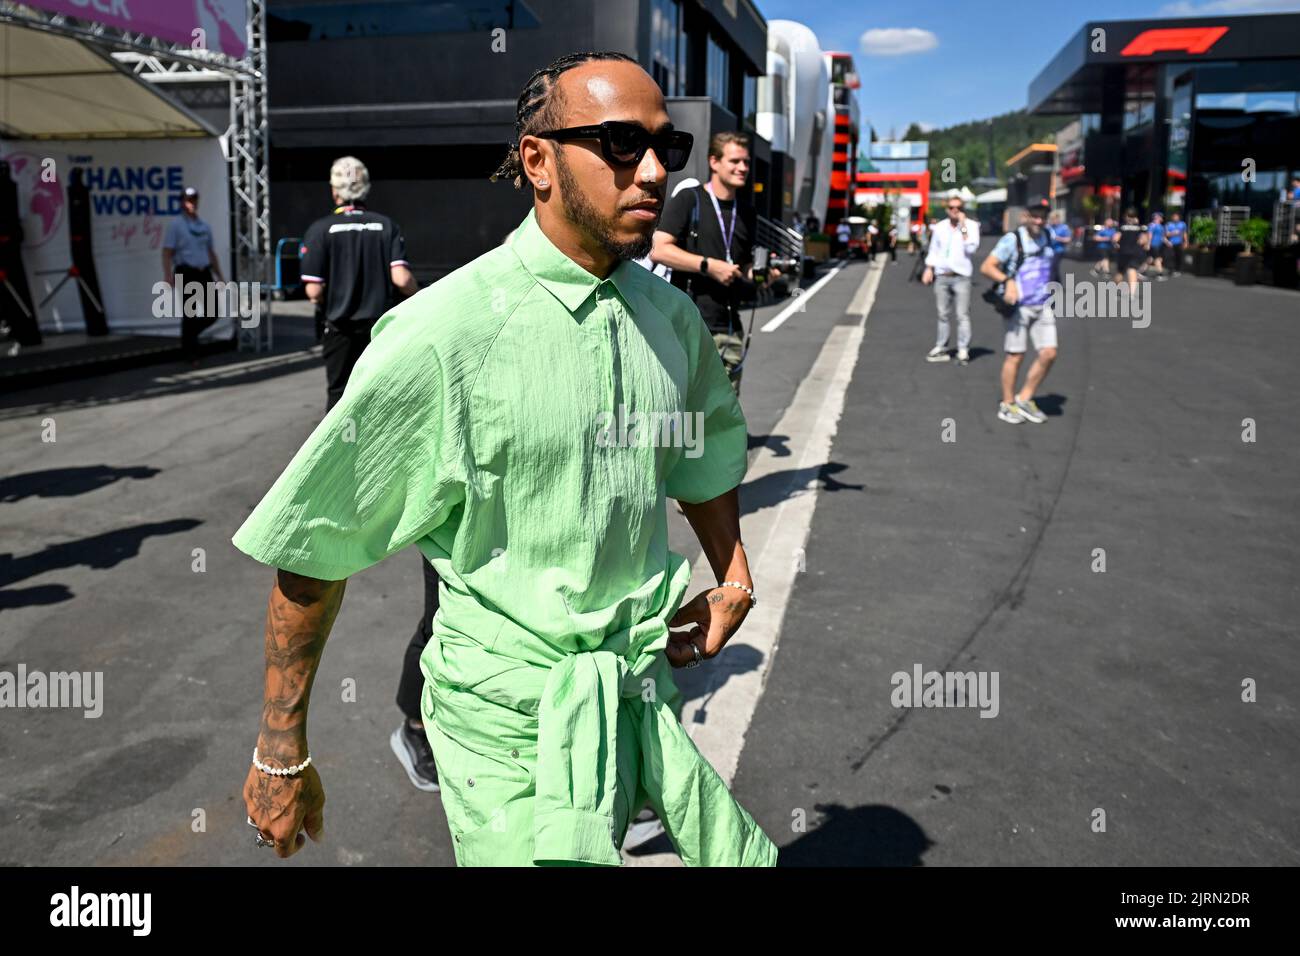 Mercedes-AMG Petronas UK rider Lewis Hamilton pictured during preparations for the Grand Prix F1 of Belgium race, in Spa-Francorchamps, Wednesday 24 August 2022. The Spa-Francorchamps Formula One Grand Prix takes place this weekend, from August 26th to August 28th. BELGA PHOTO DIRK WAEM Stock Photo